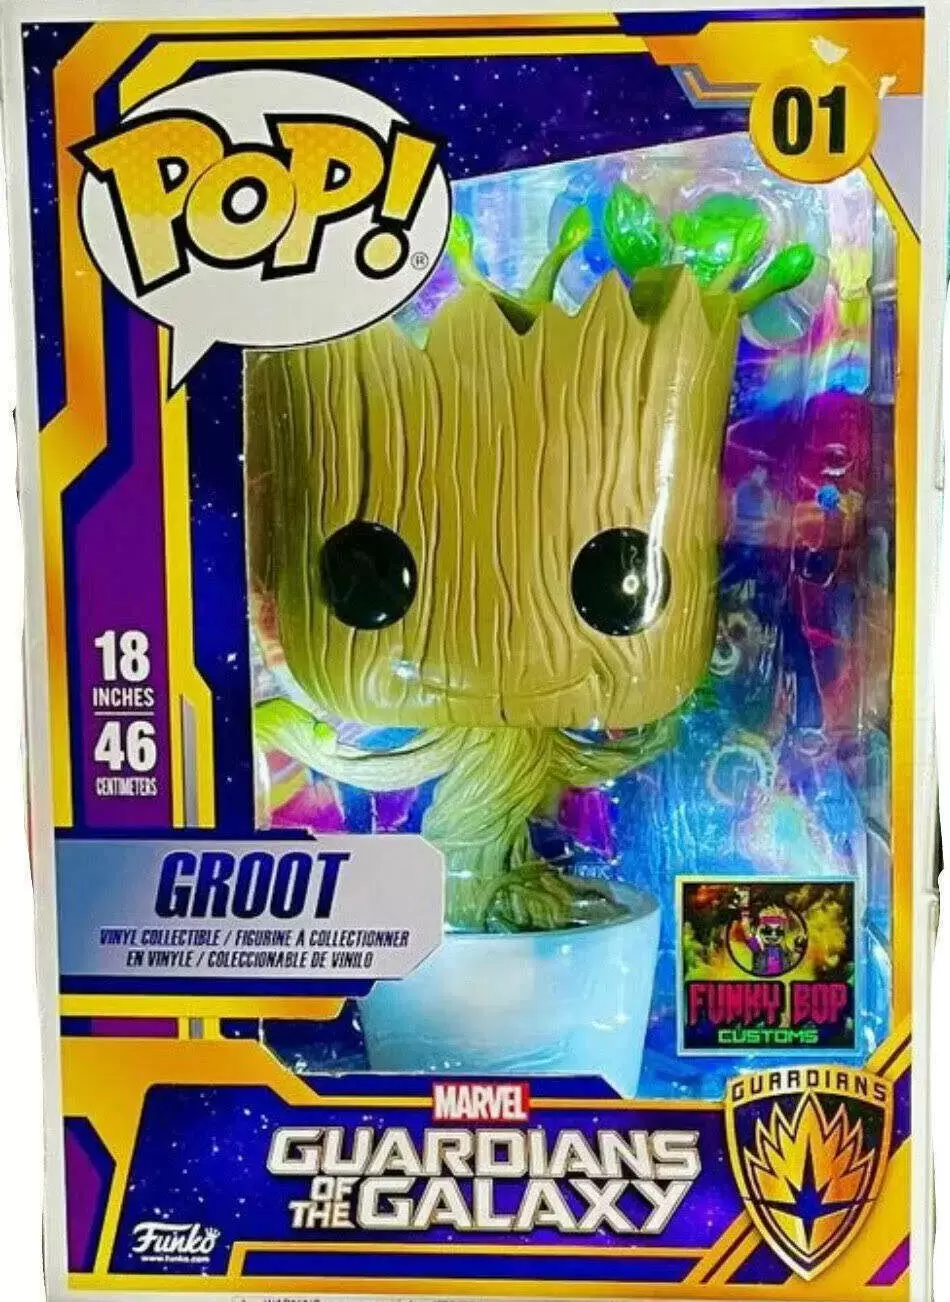 Guardians of the Galaxy - Dancing Groot 18 Light Up - POP! MARVEL